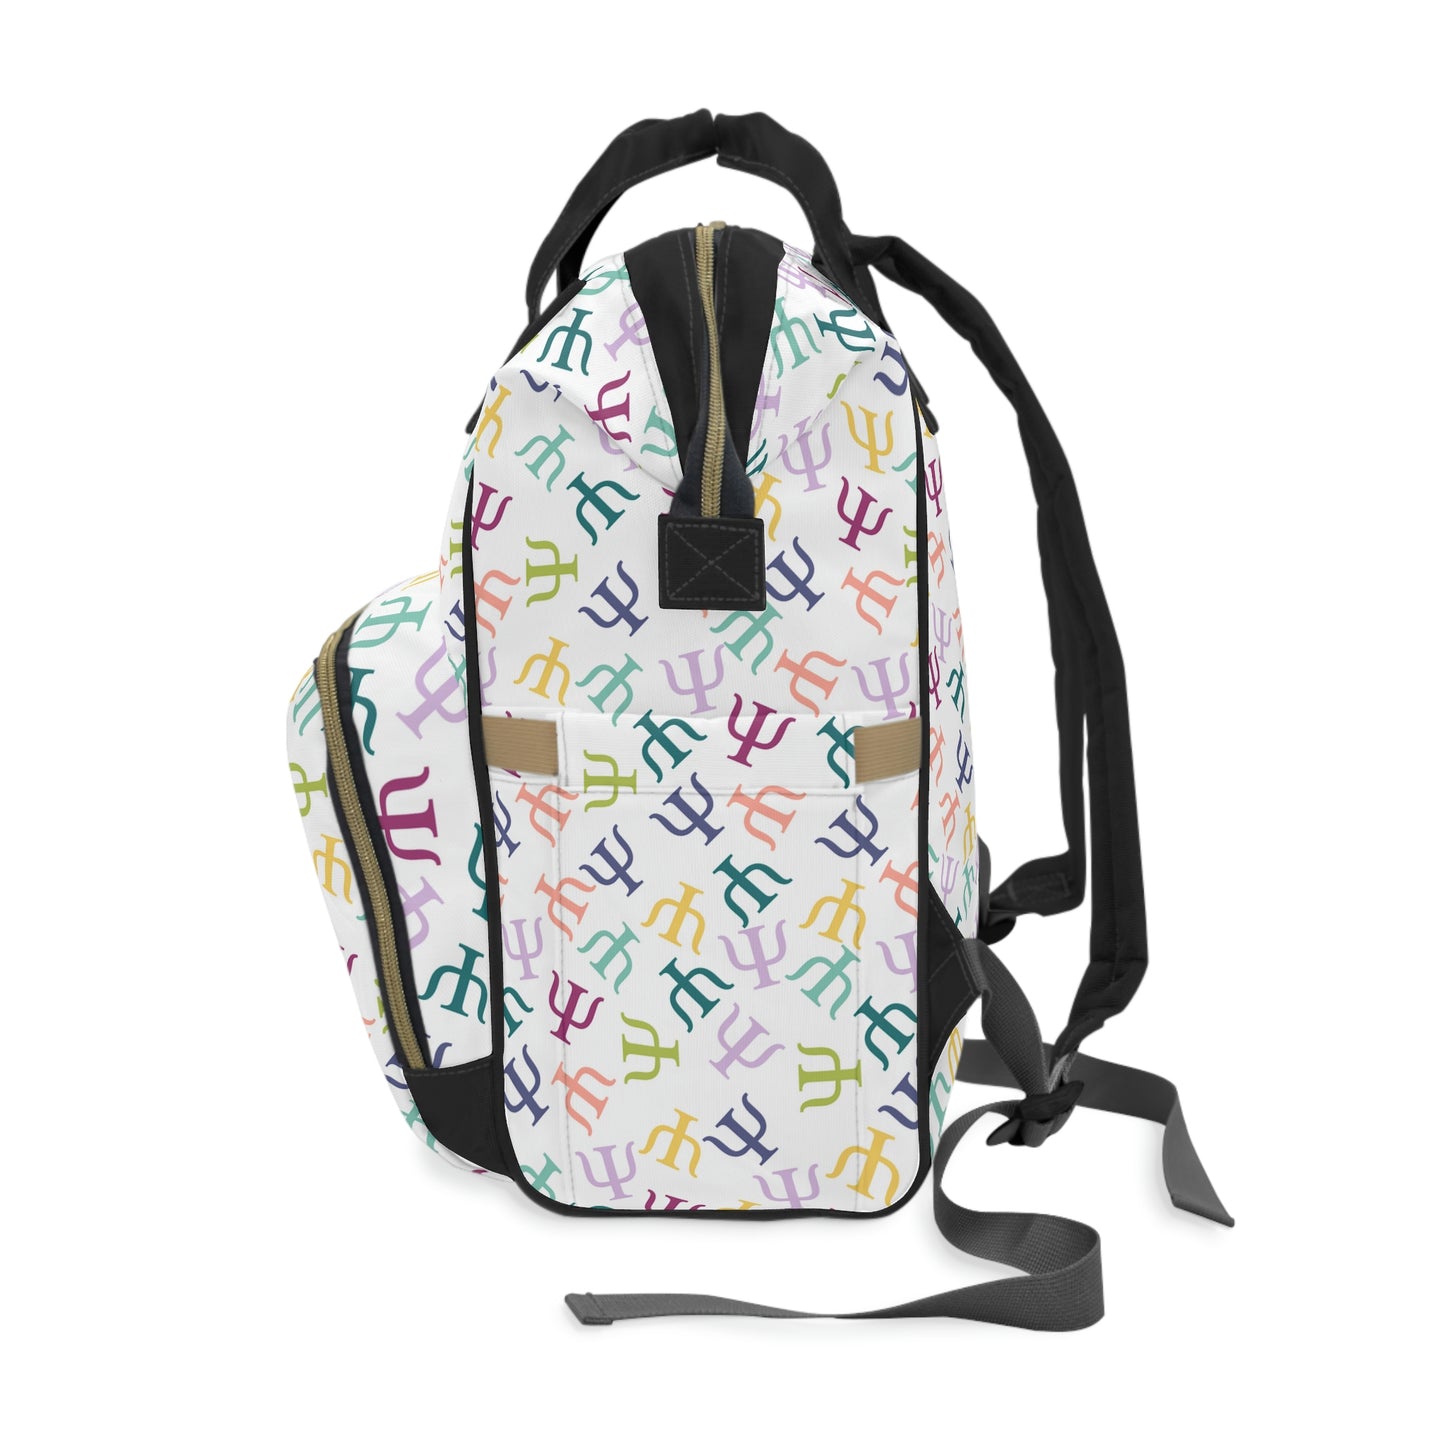 Muted Rainbow Psych Symbol Backpack